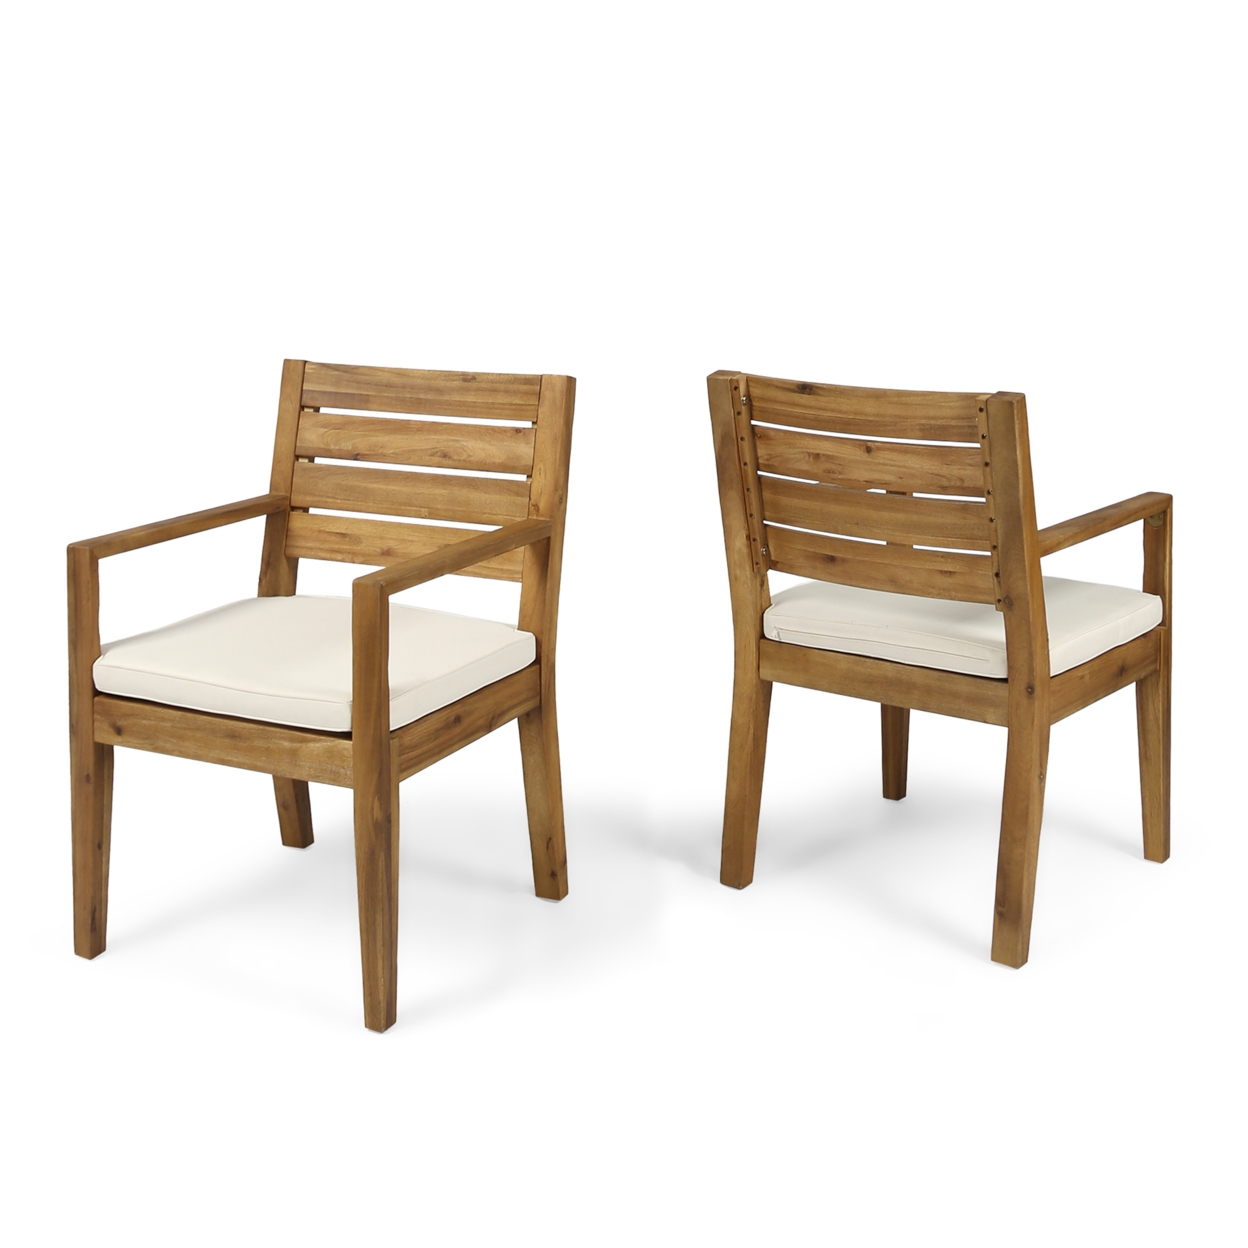 Arely Outdoor Acacia Wood Dining Chairs(Set Of 2) - Sandblast Natural Finish + Cream